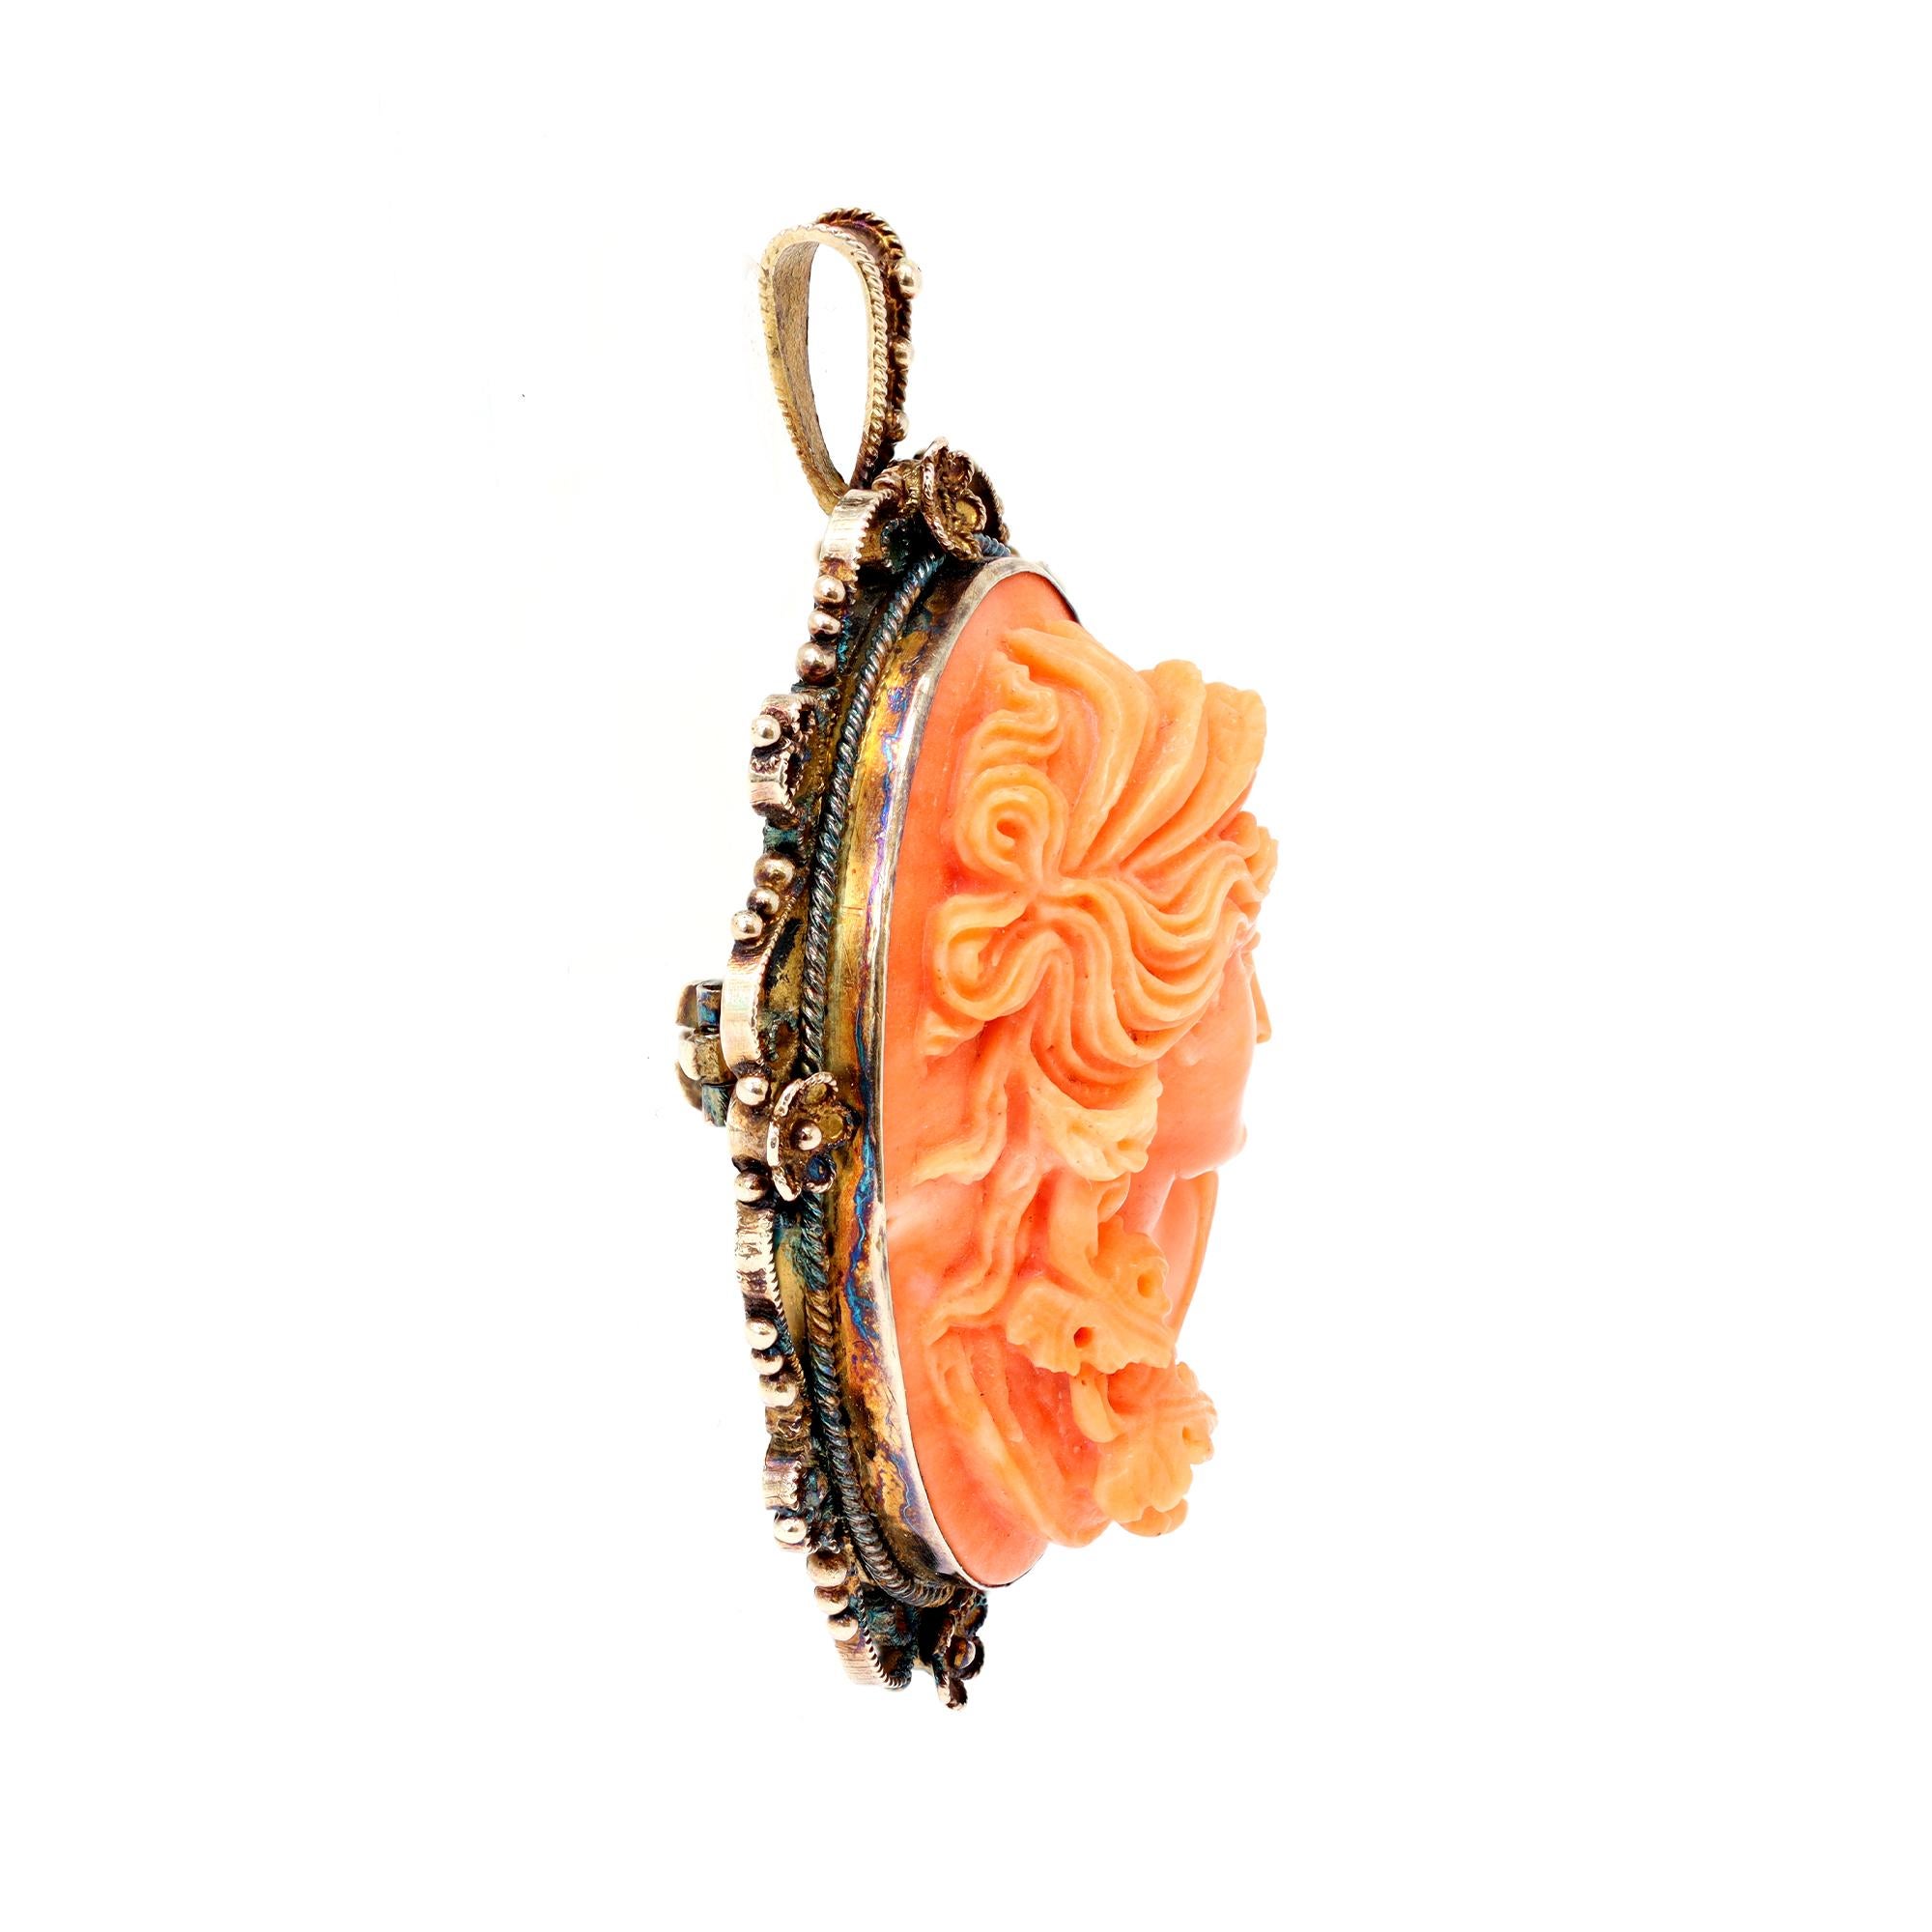 A striking and rare coral carving attributed to Italian craftsmanship, Circa 1900. The carving represents an intricate female figure with floral and leaf motifs around her neck. The coral is natural with no indication of dye. The bezel setting was